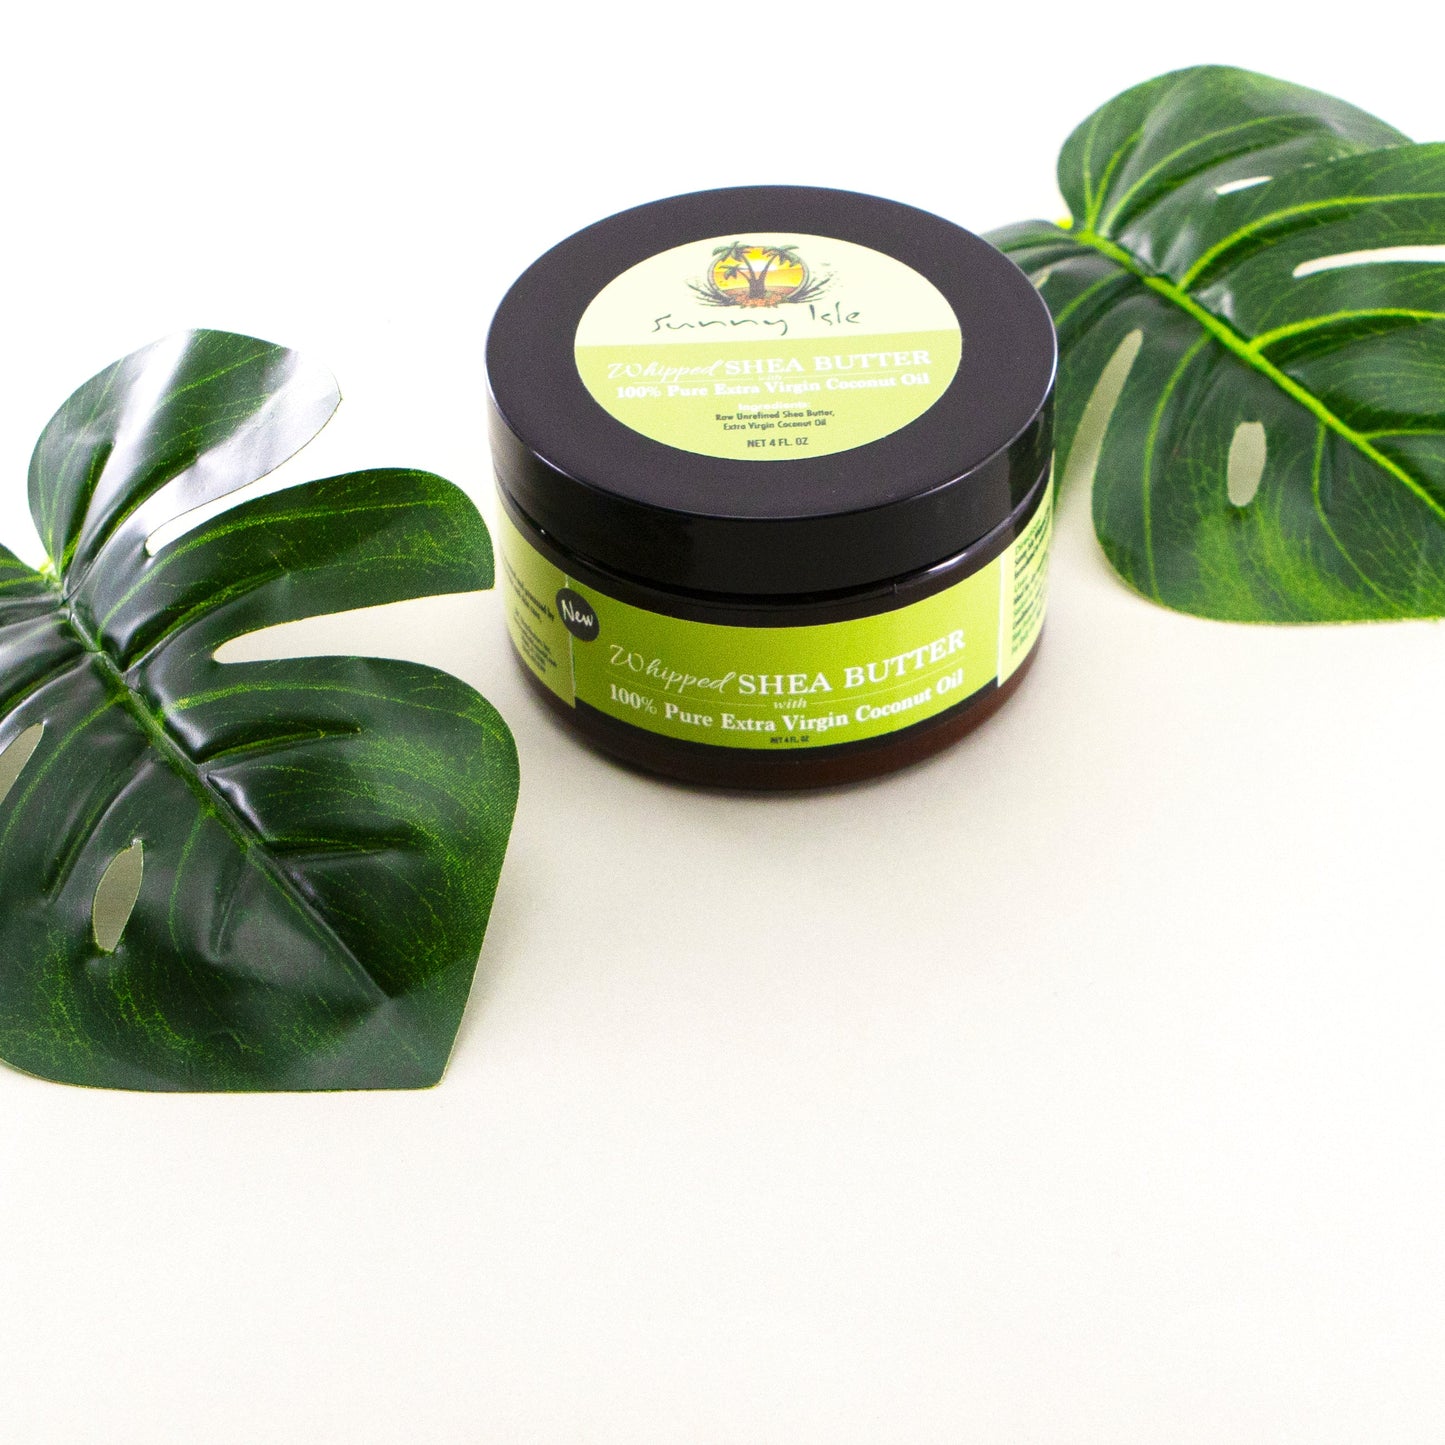 Sunny Isle Whipped Shea Butter with Coconut 4 oz.